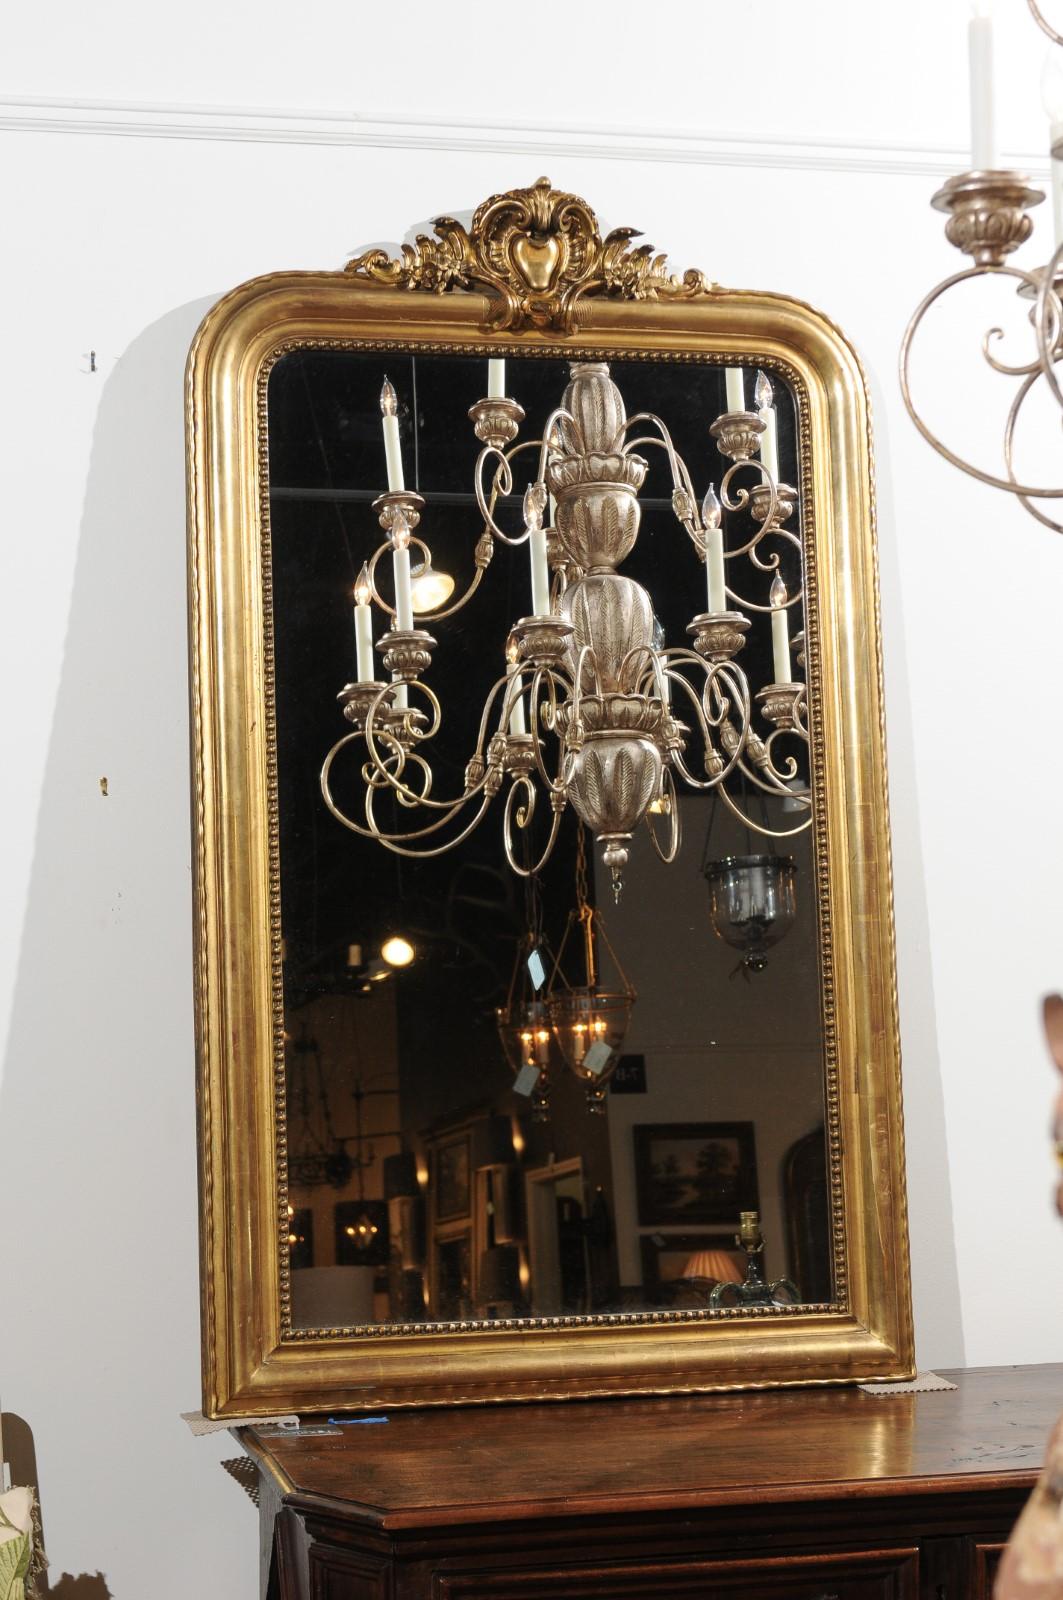 A French tall giltwood Louis-Philippe style mirror from the 19th century with hand-carved crest, beaded motifs and wavy pattern. This French Louis-Philippe style gilded mirror captures all of our attention with its exquisite hand-carved crest,